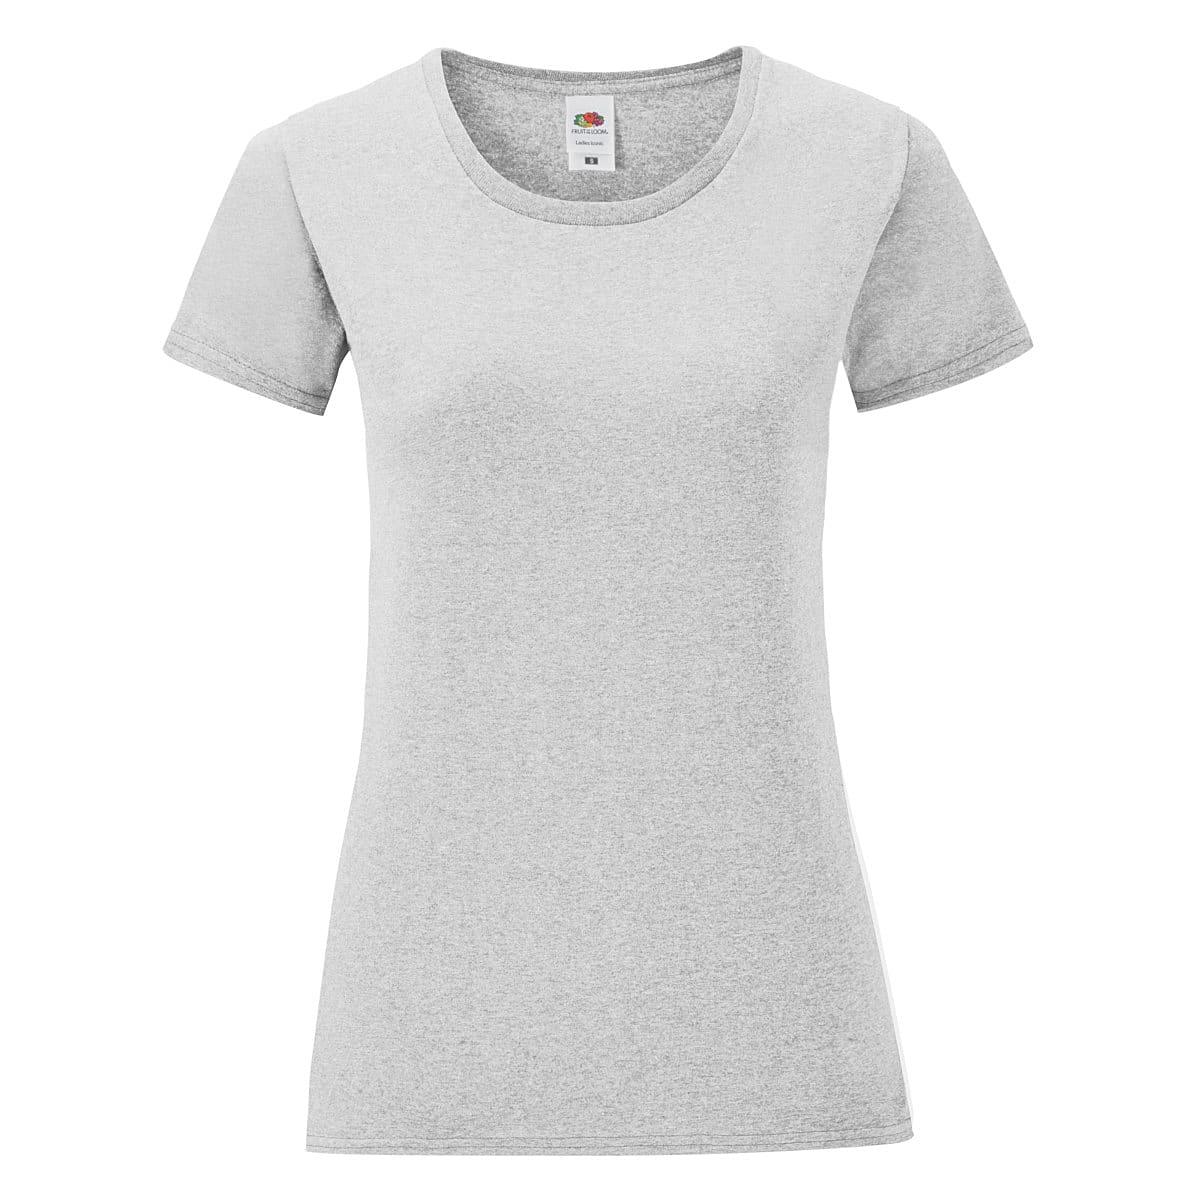 Fruit Of The Loom Womens Iconic T-Shirt in Heather Grey (Product Code: 61432)